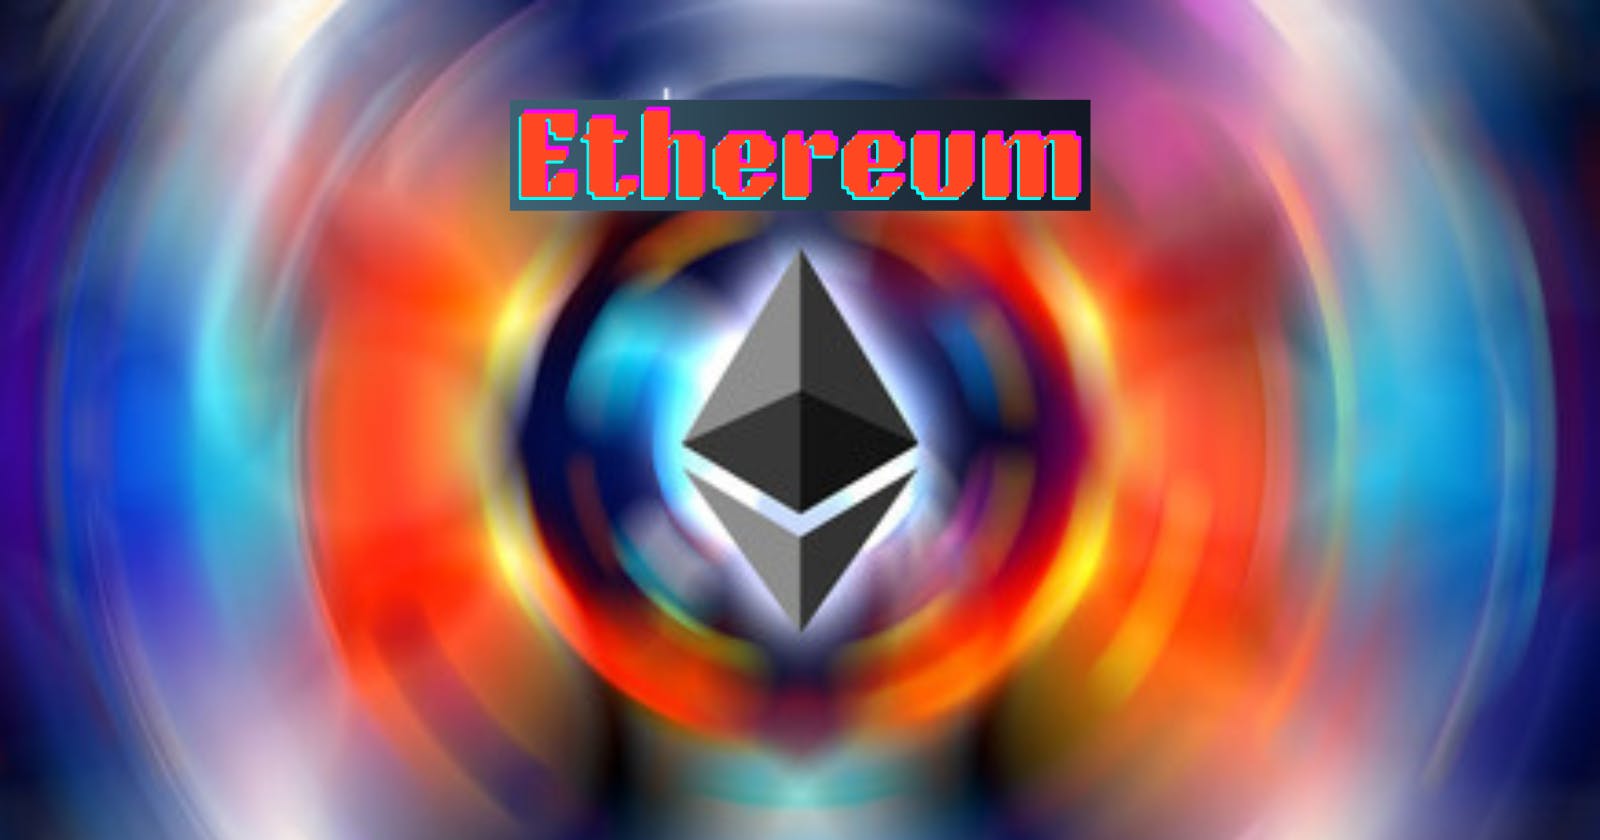 Ethereum and its terminologies